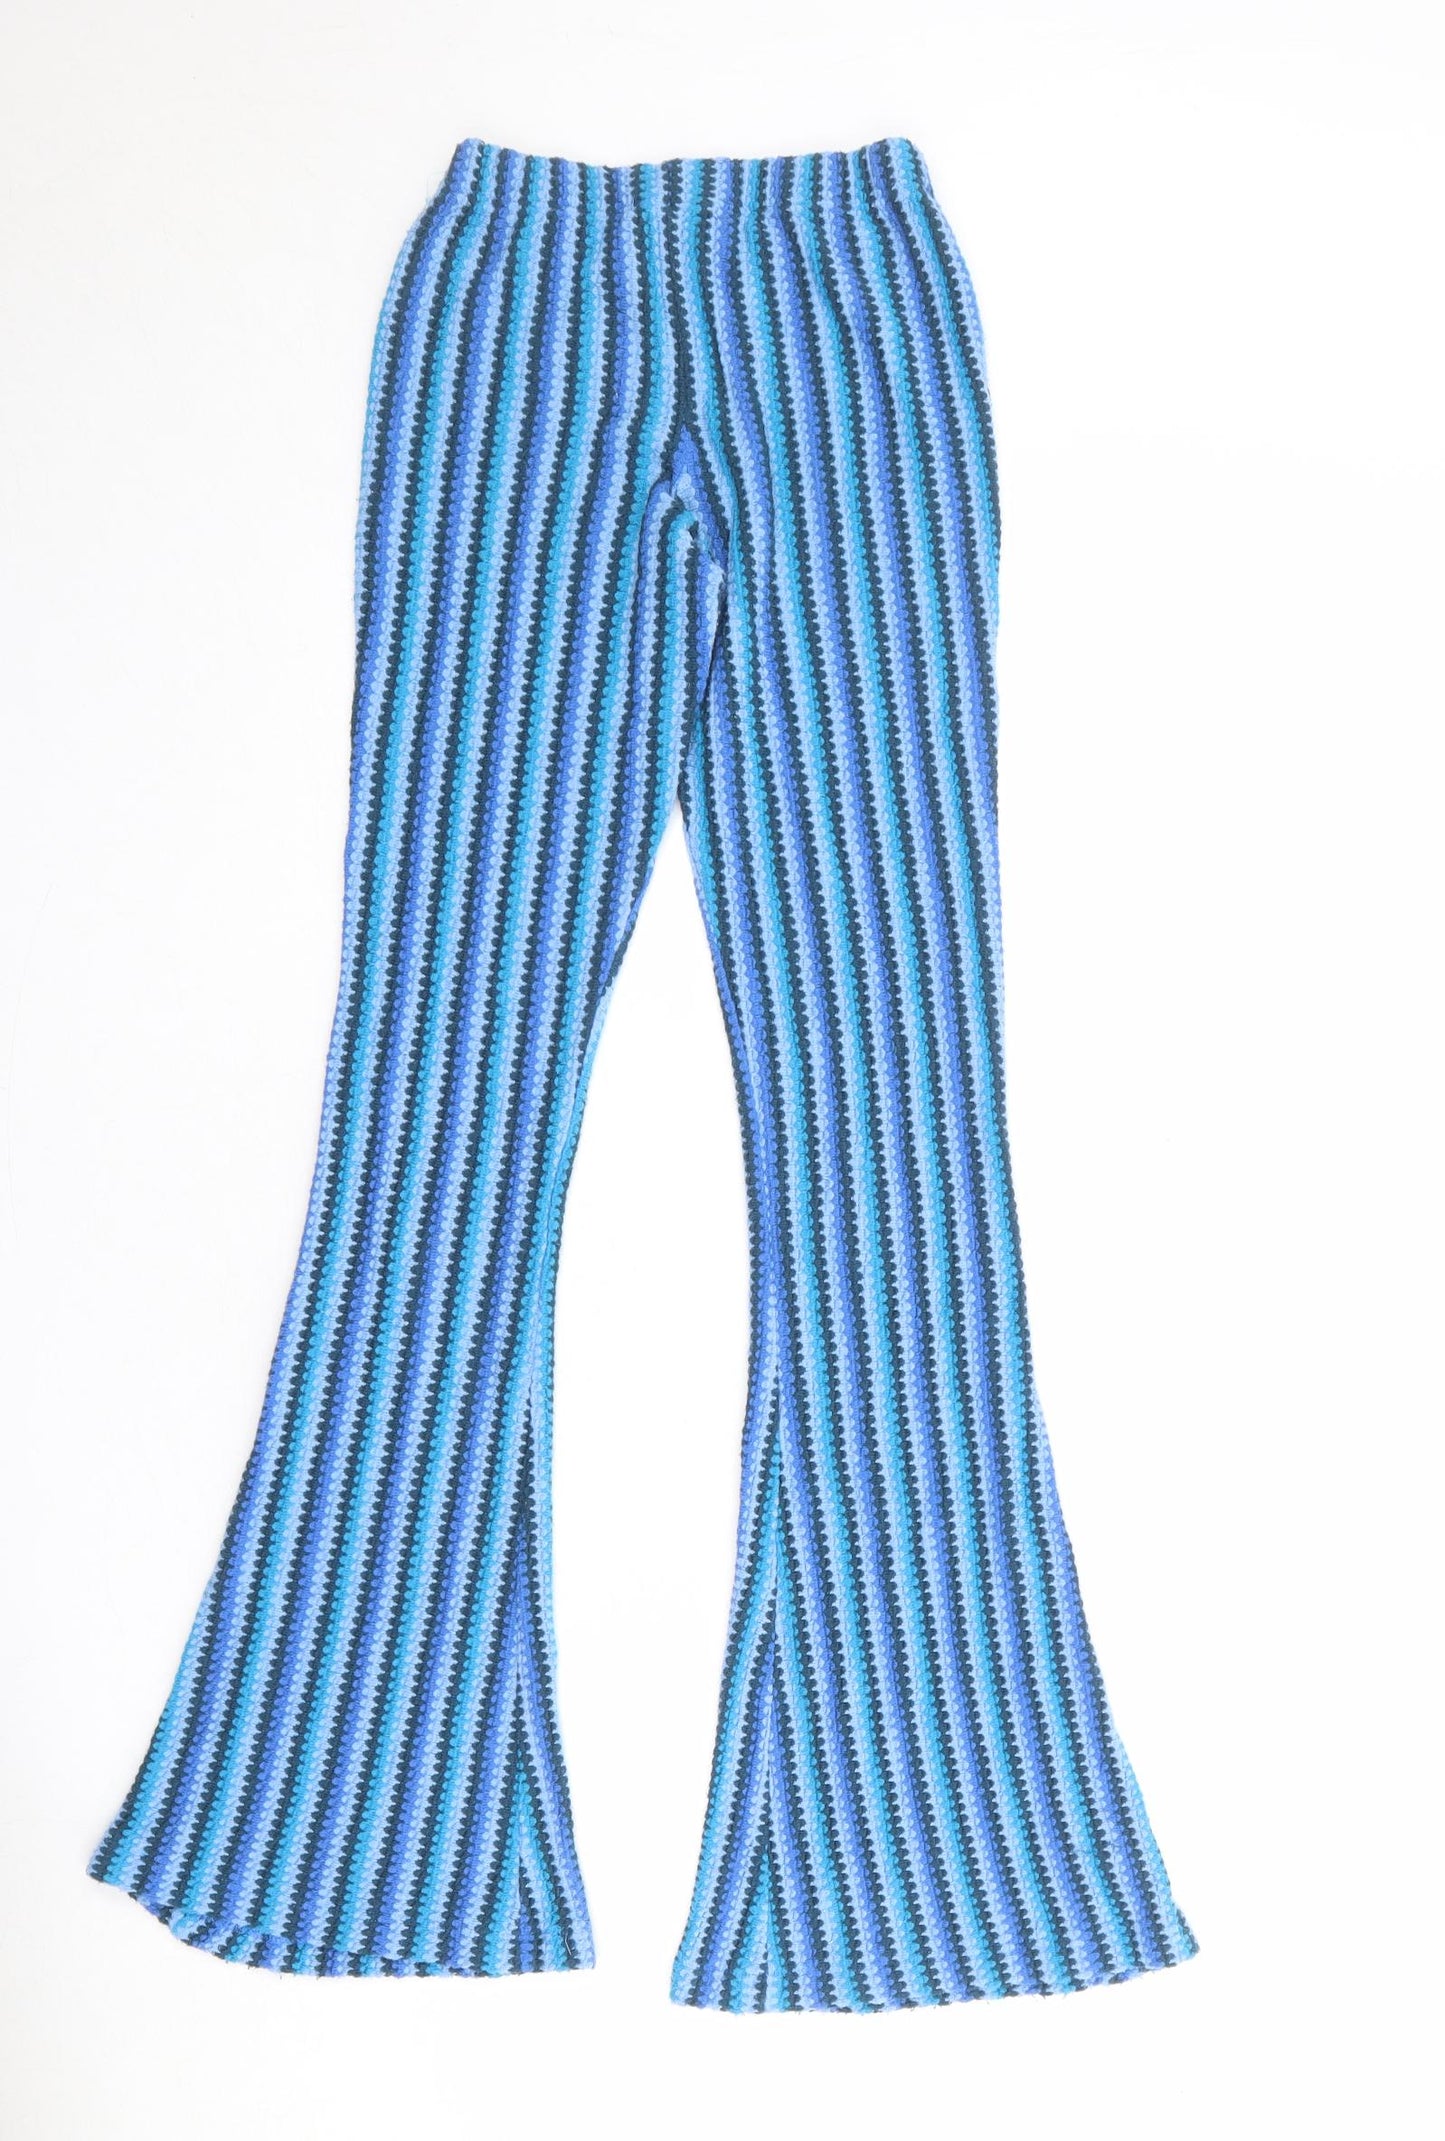 Urban Outfitters Womens Blue Geometric Polyester Jogger Trousers Size XS Regular